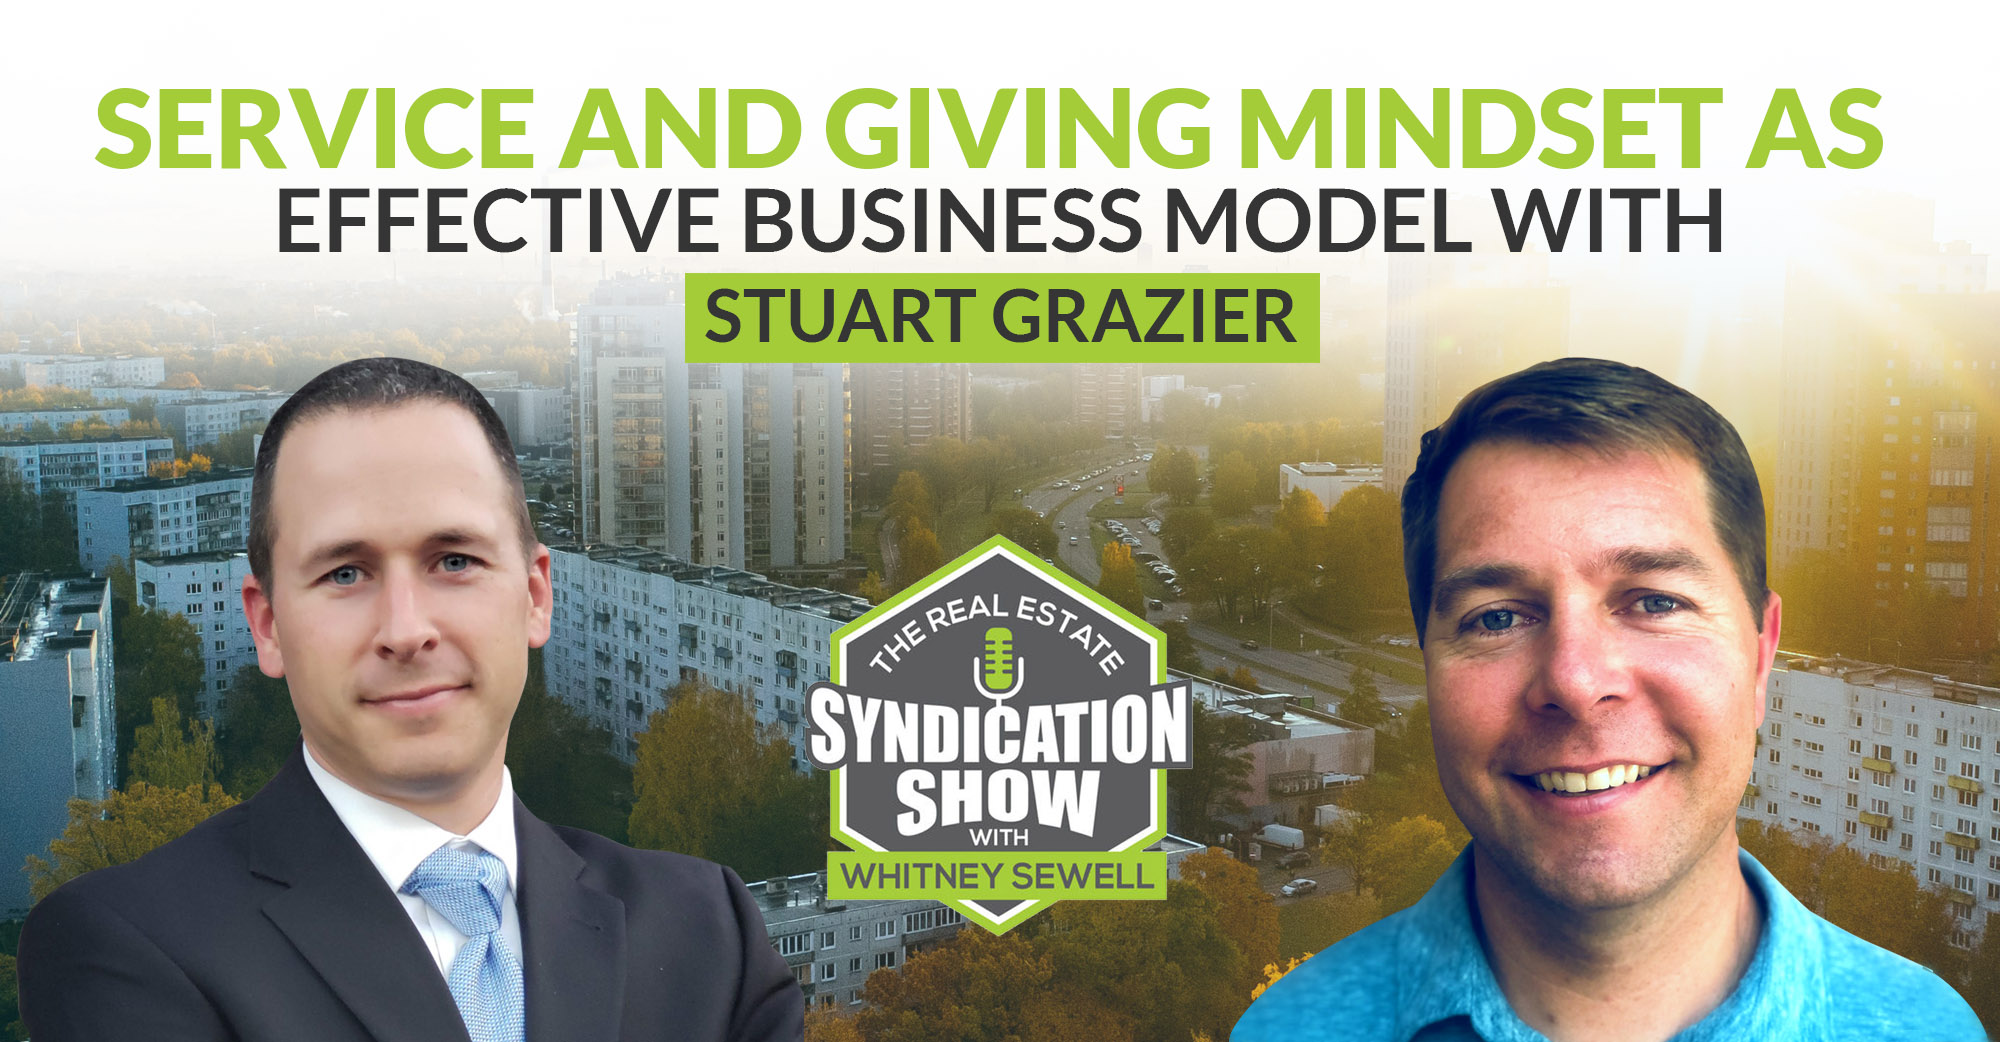 Service and Giving Mindset As Effective Business Model with Stuart Grazier